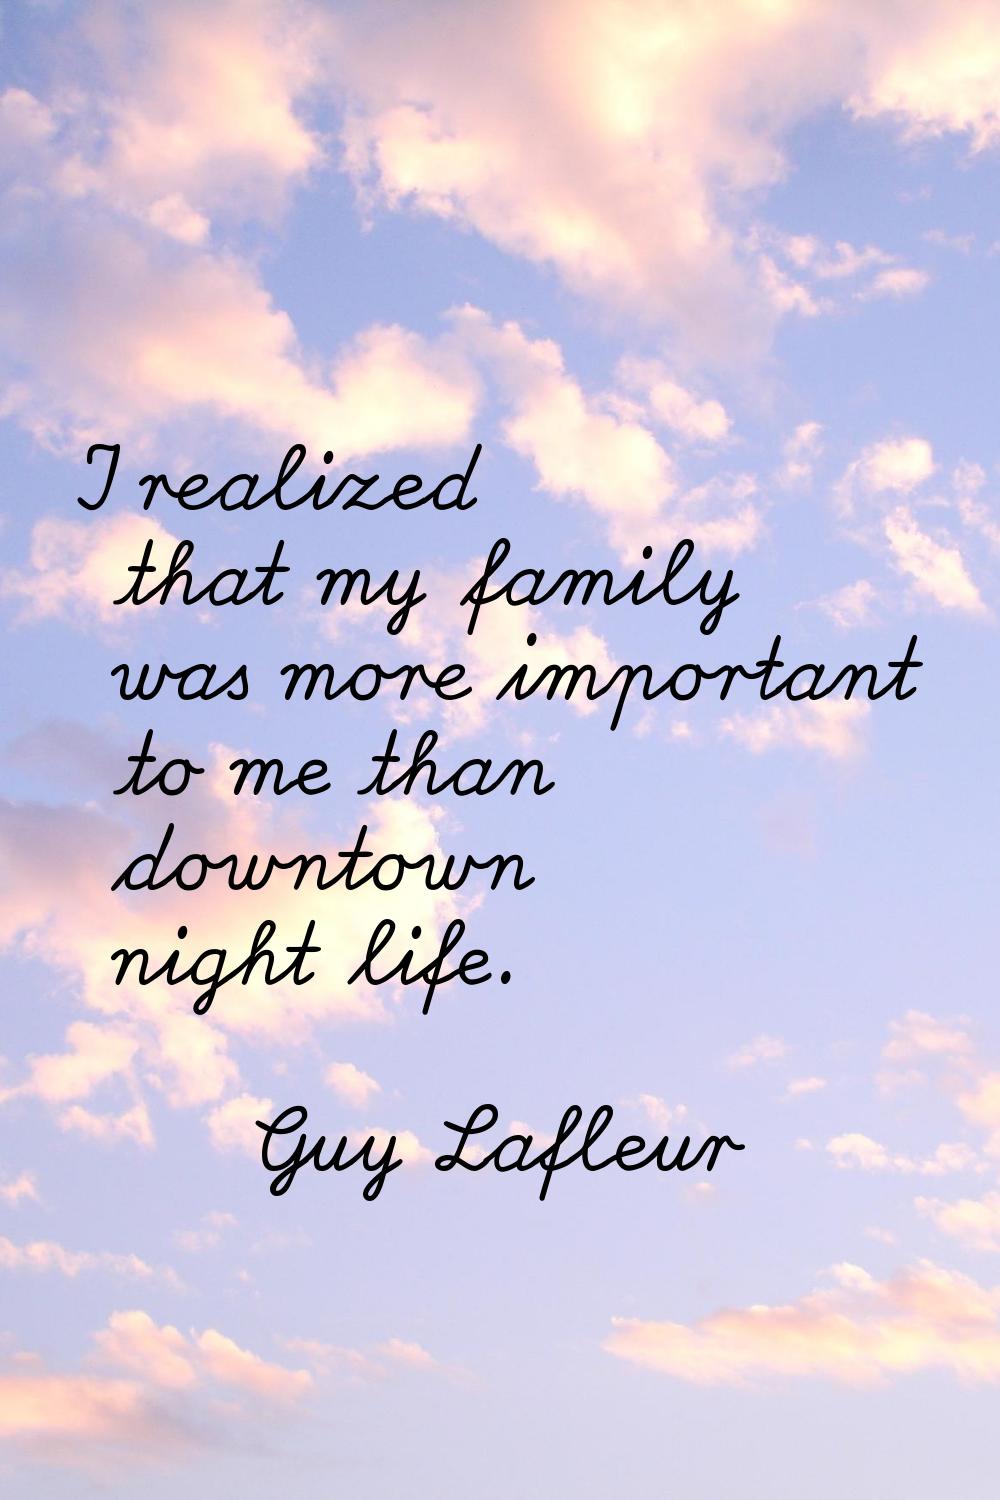 I realized that my family was more important to me than downtown night life.